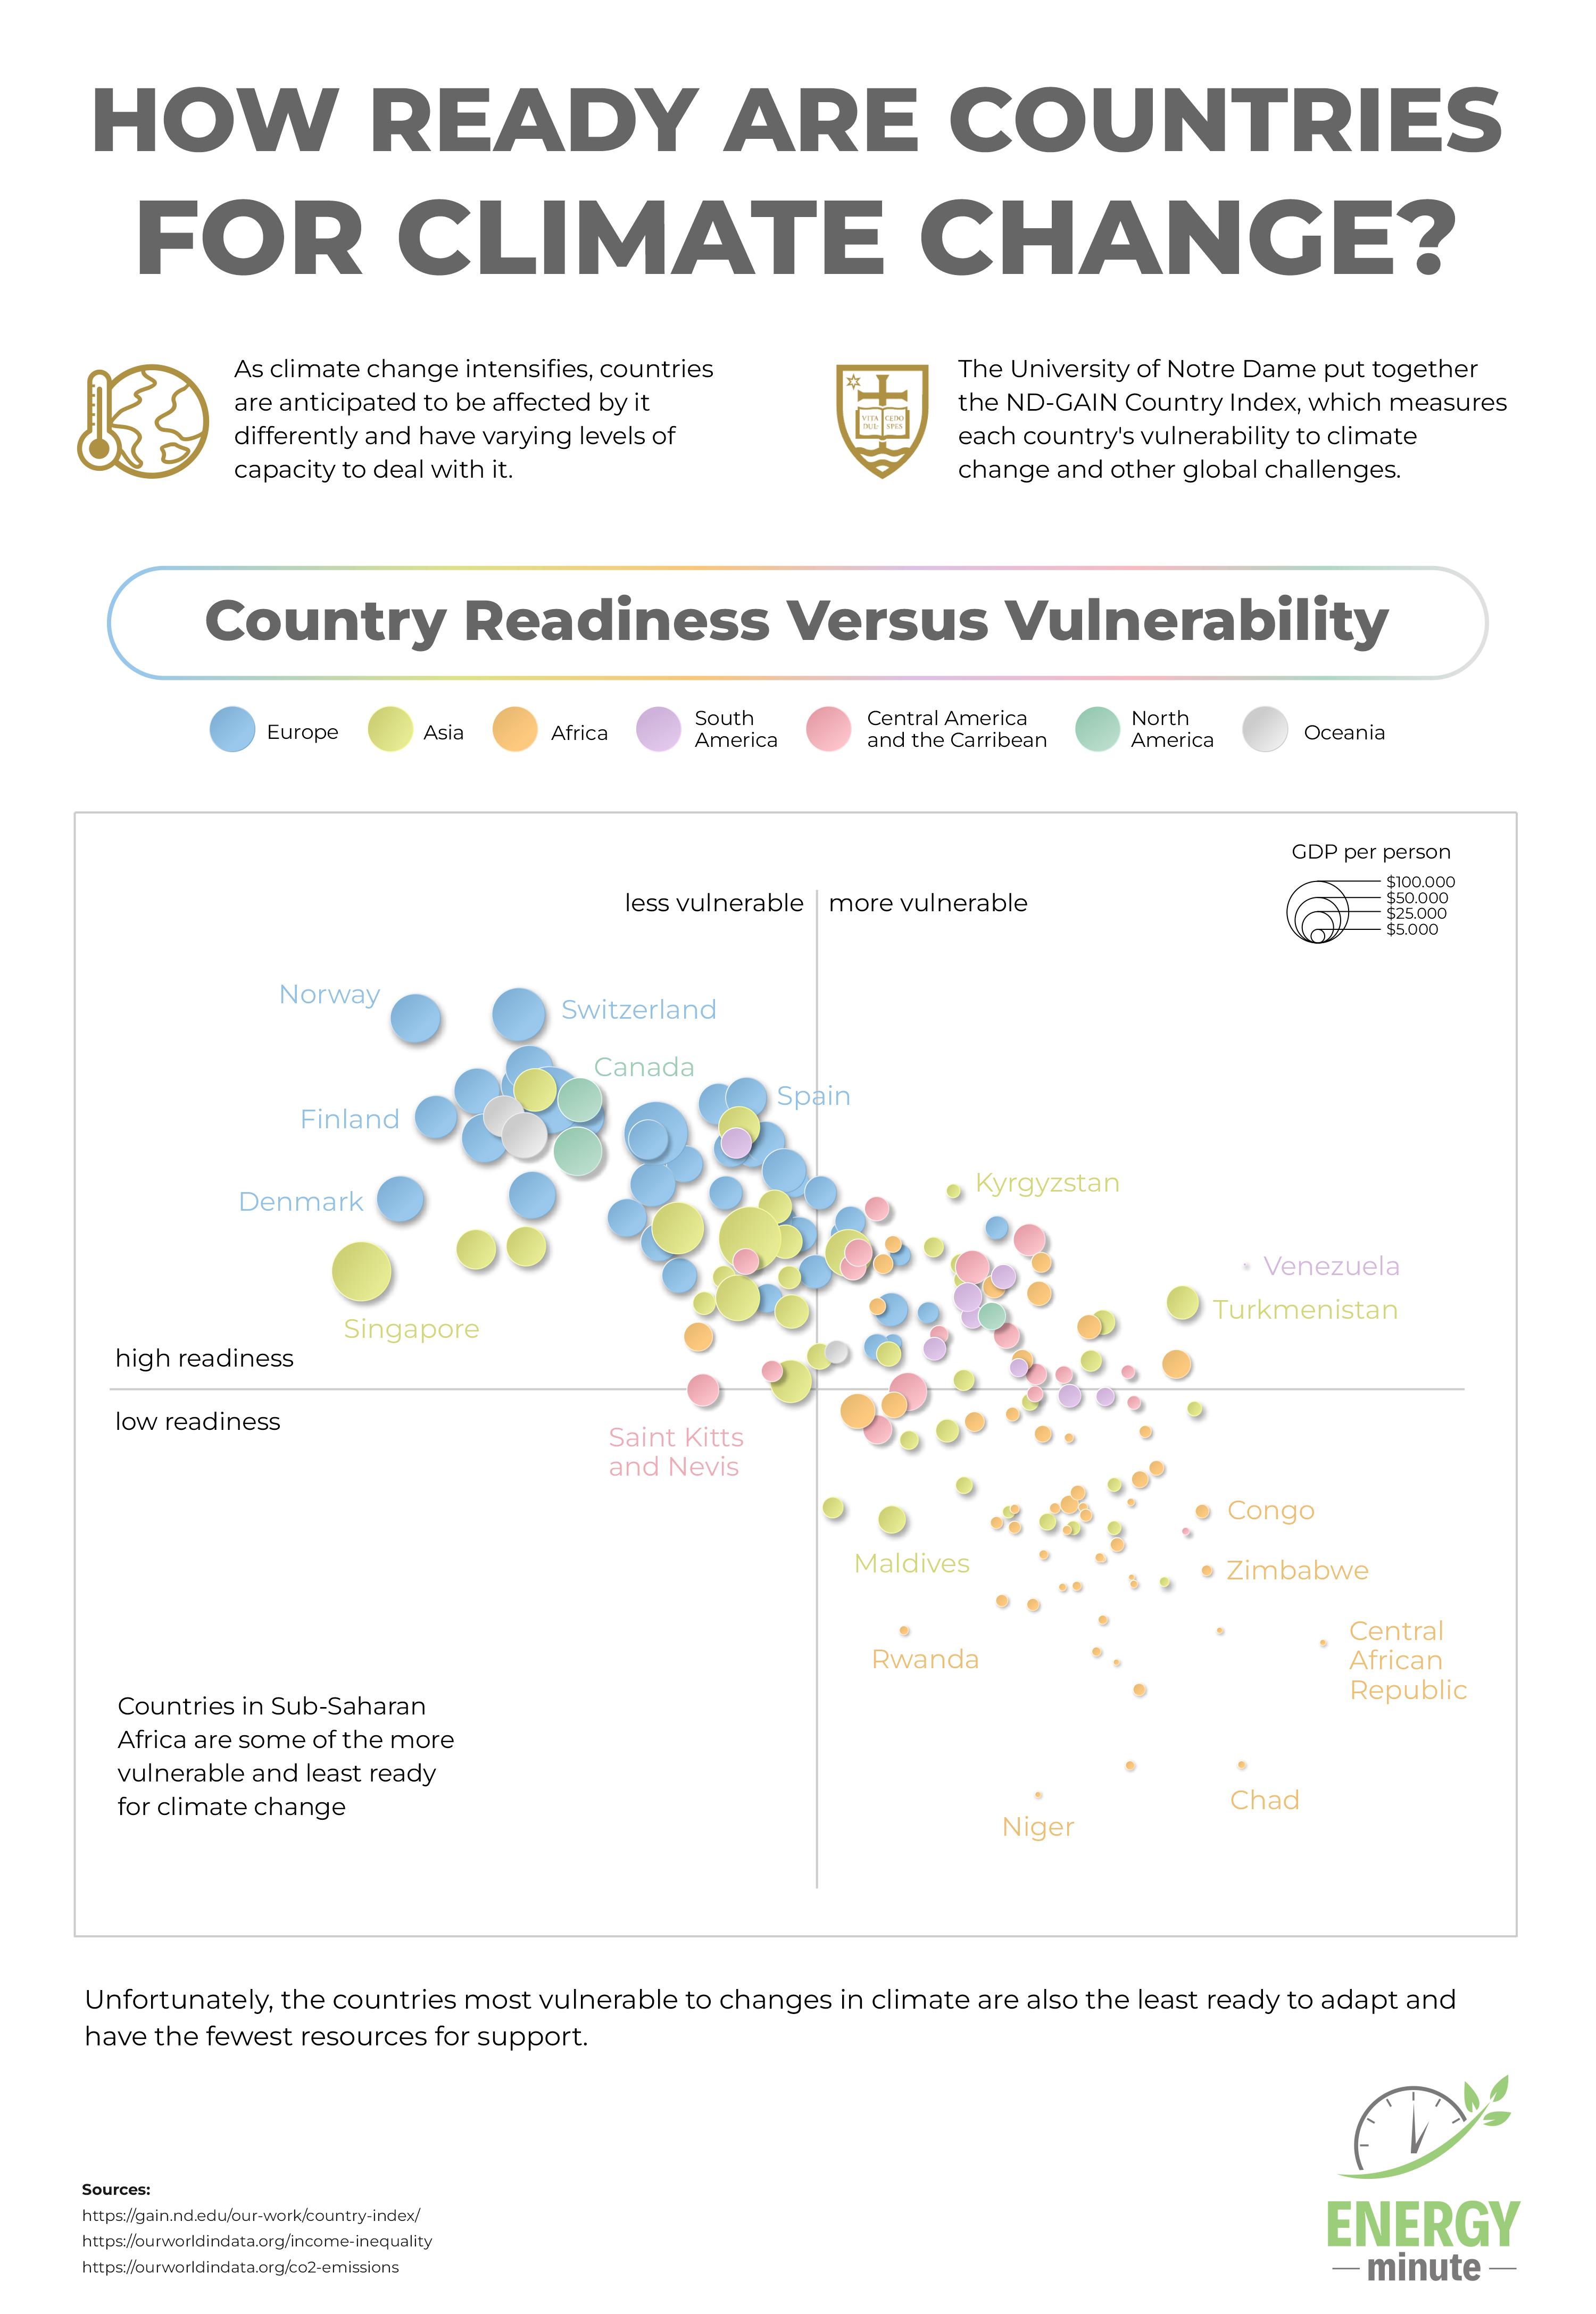 Country readiness versus vulnerability to climate change